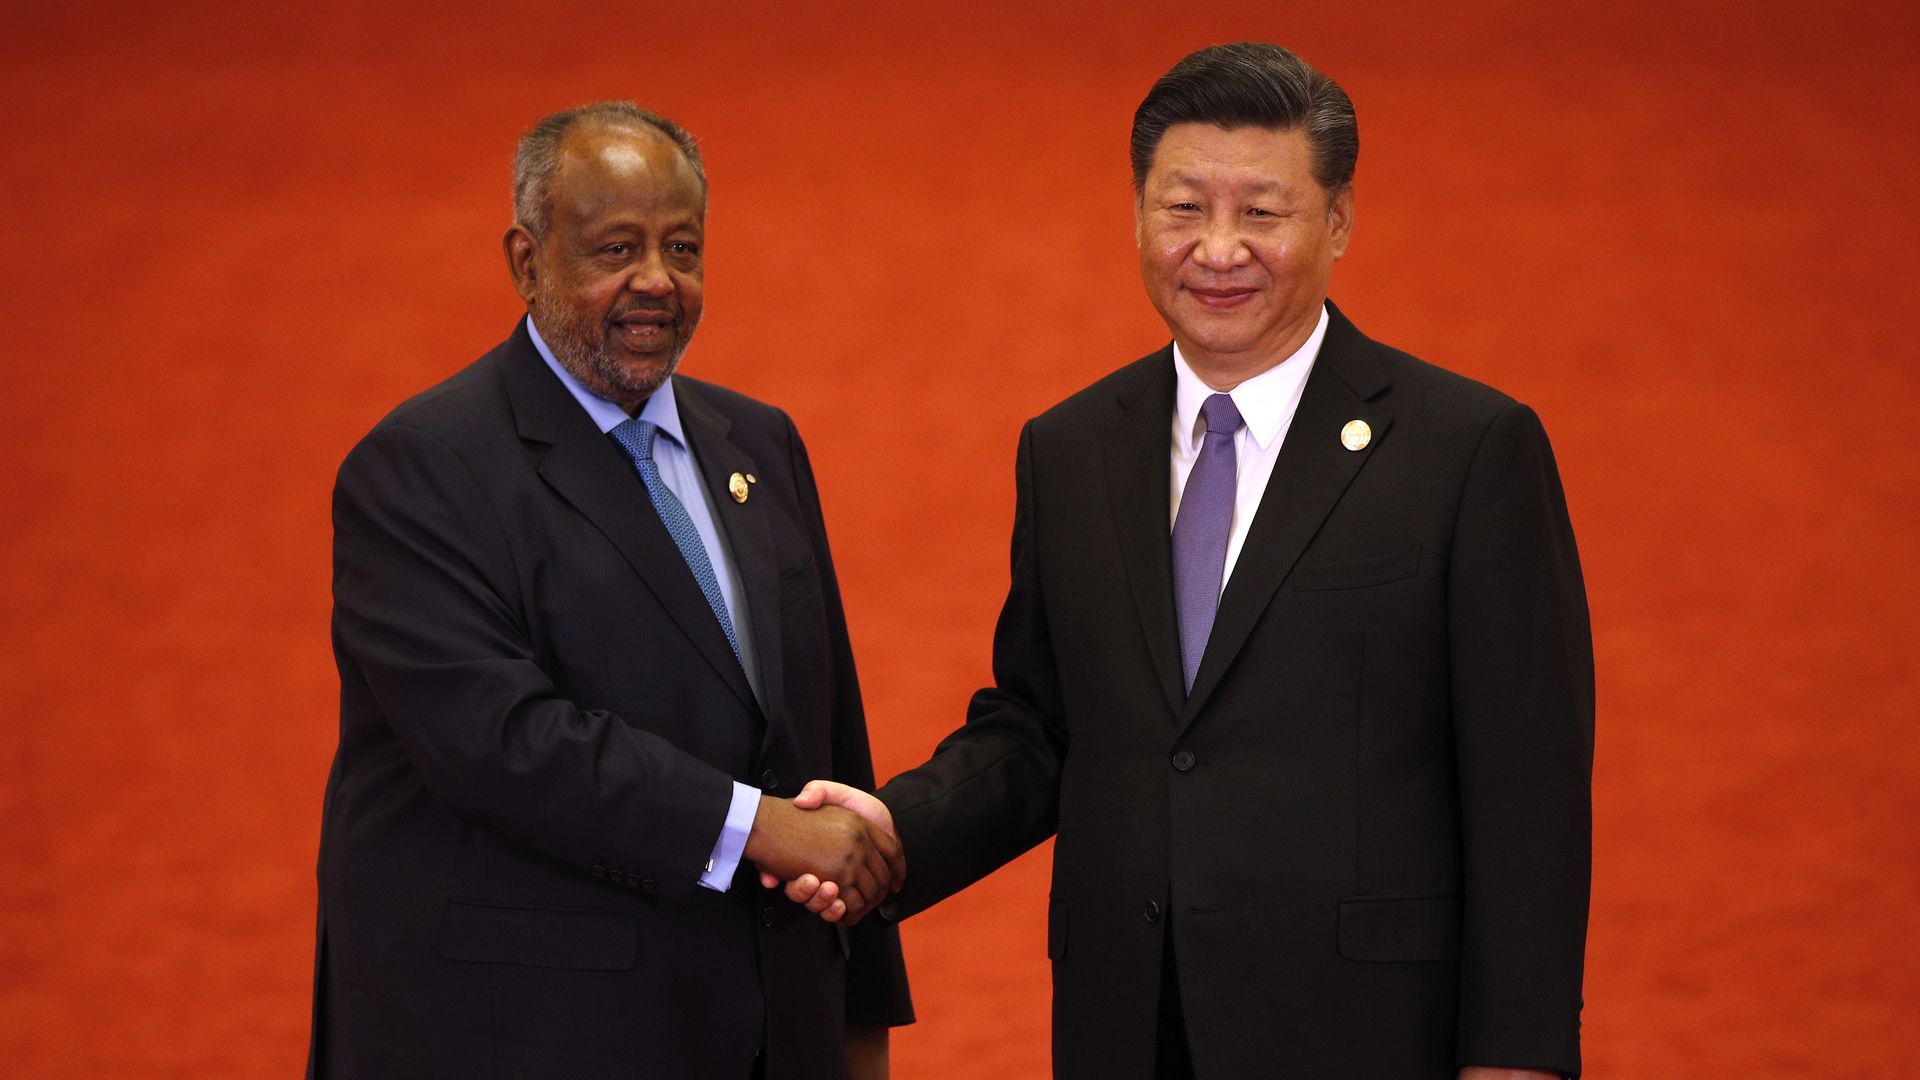 Djibouti's President Ismail Omar Guelleh shakes hands with Chinese President Xi Jinping during the Forum on China-Africa Cooperation on September 3, 2018 in Beijing, China.